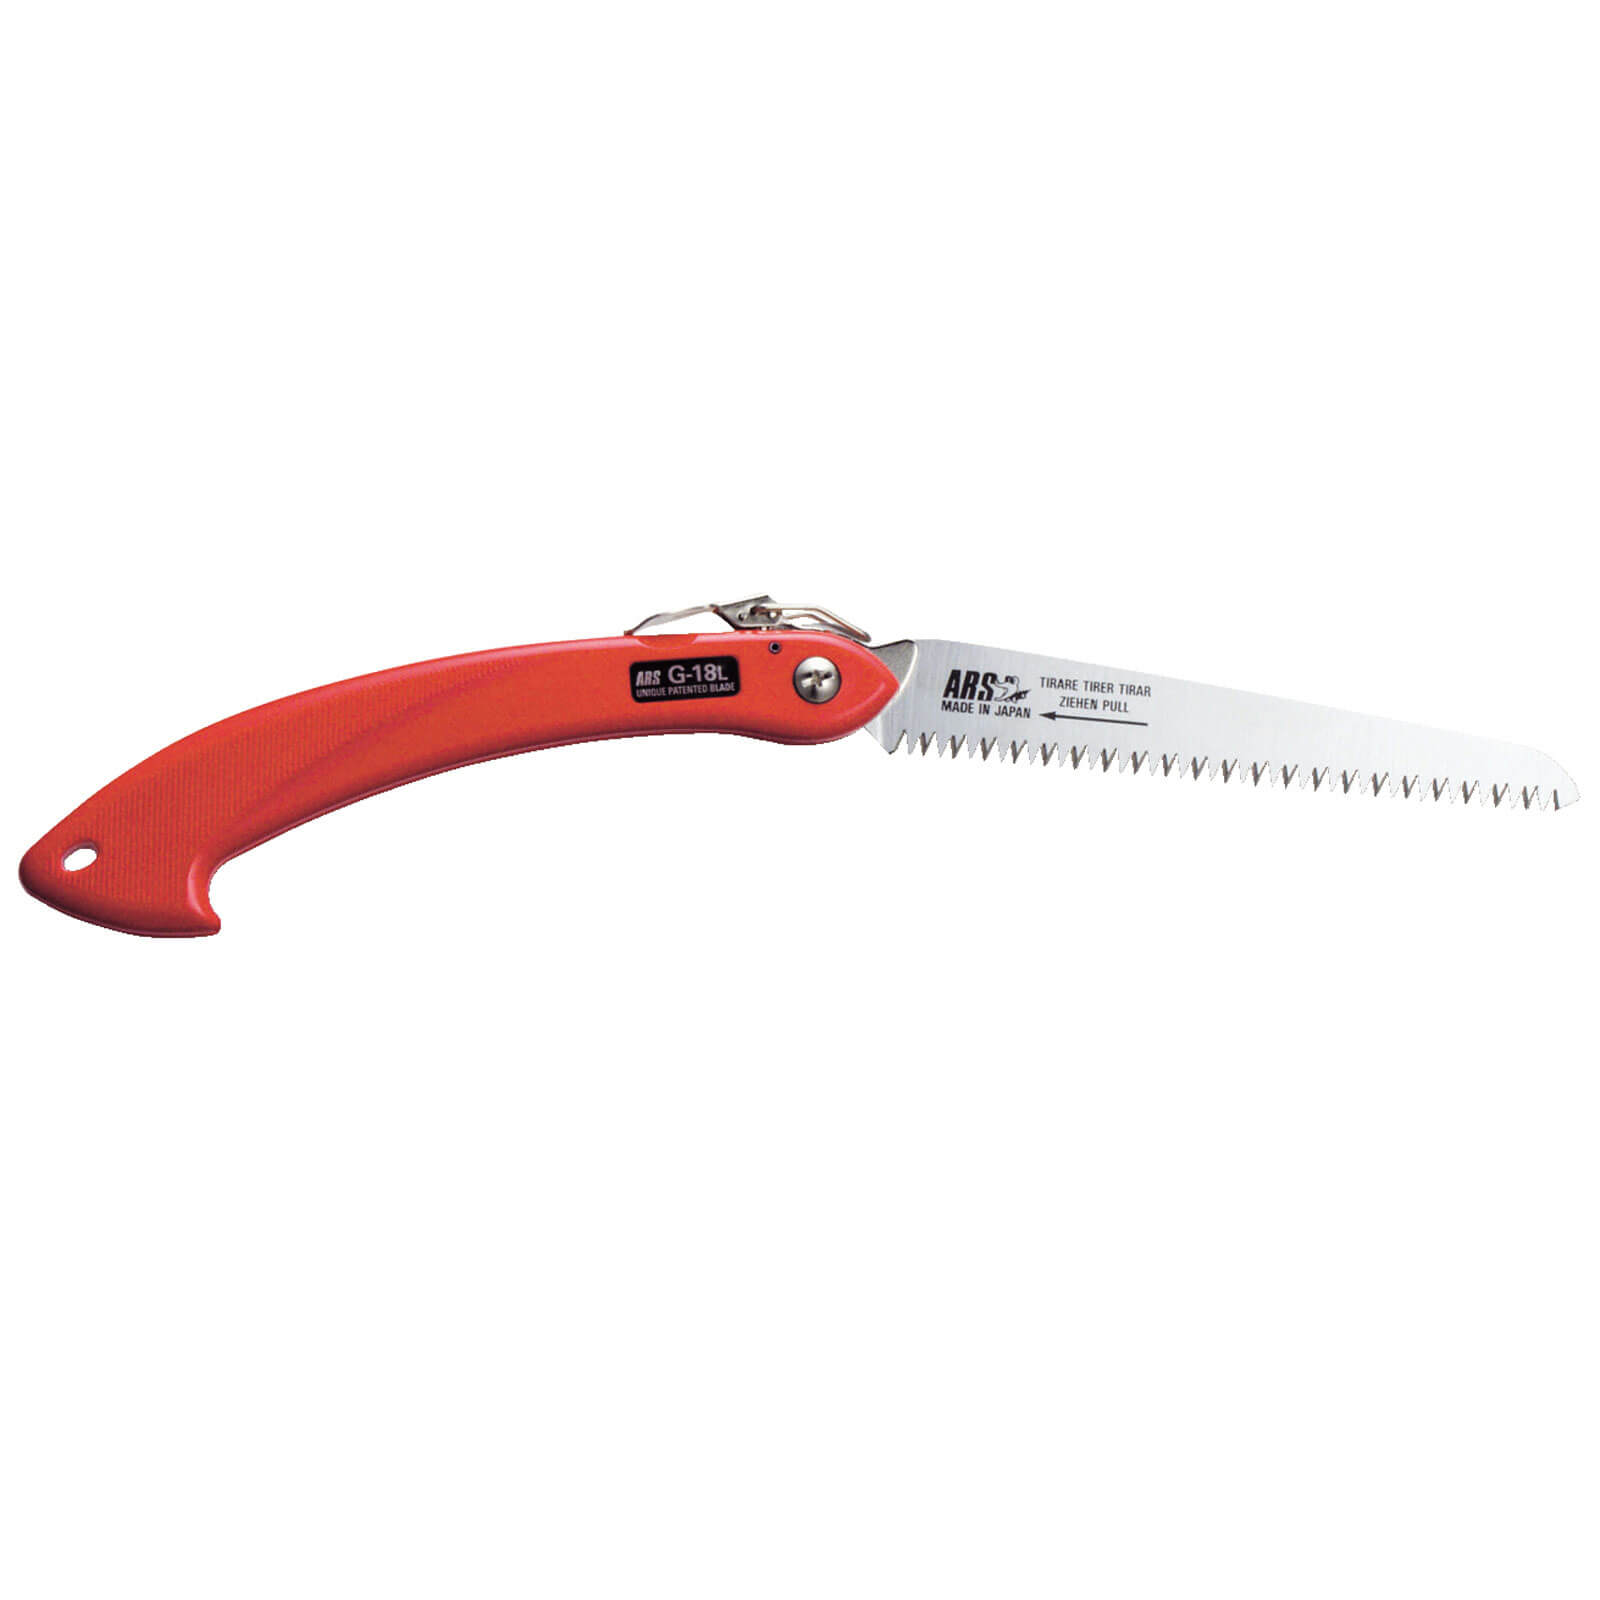 Image of ARS G-18L Folding Pruning Saw 180mm